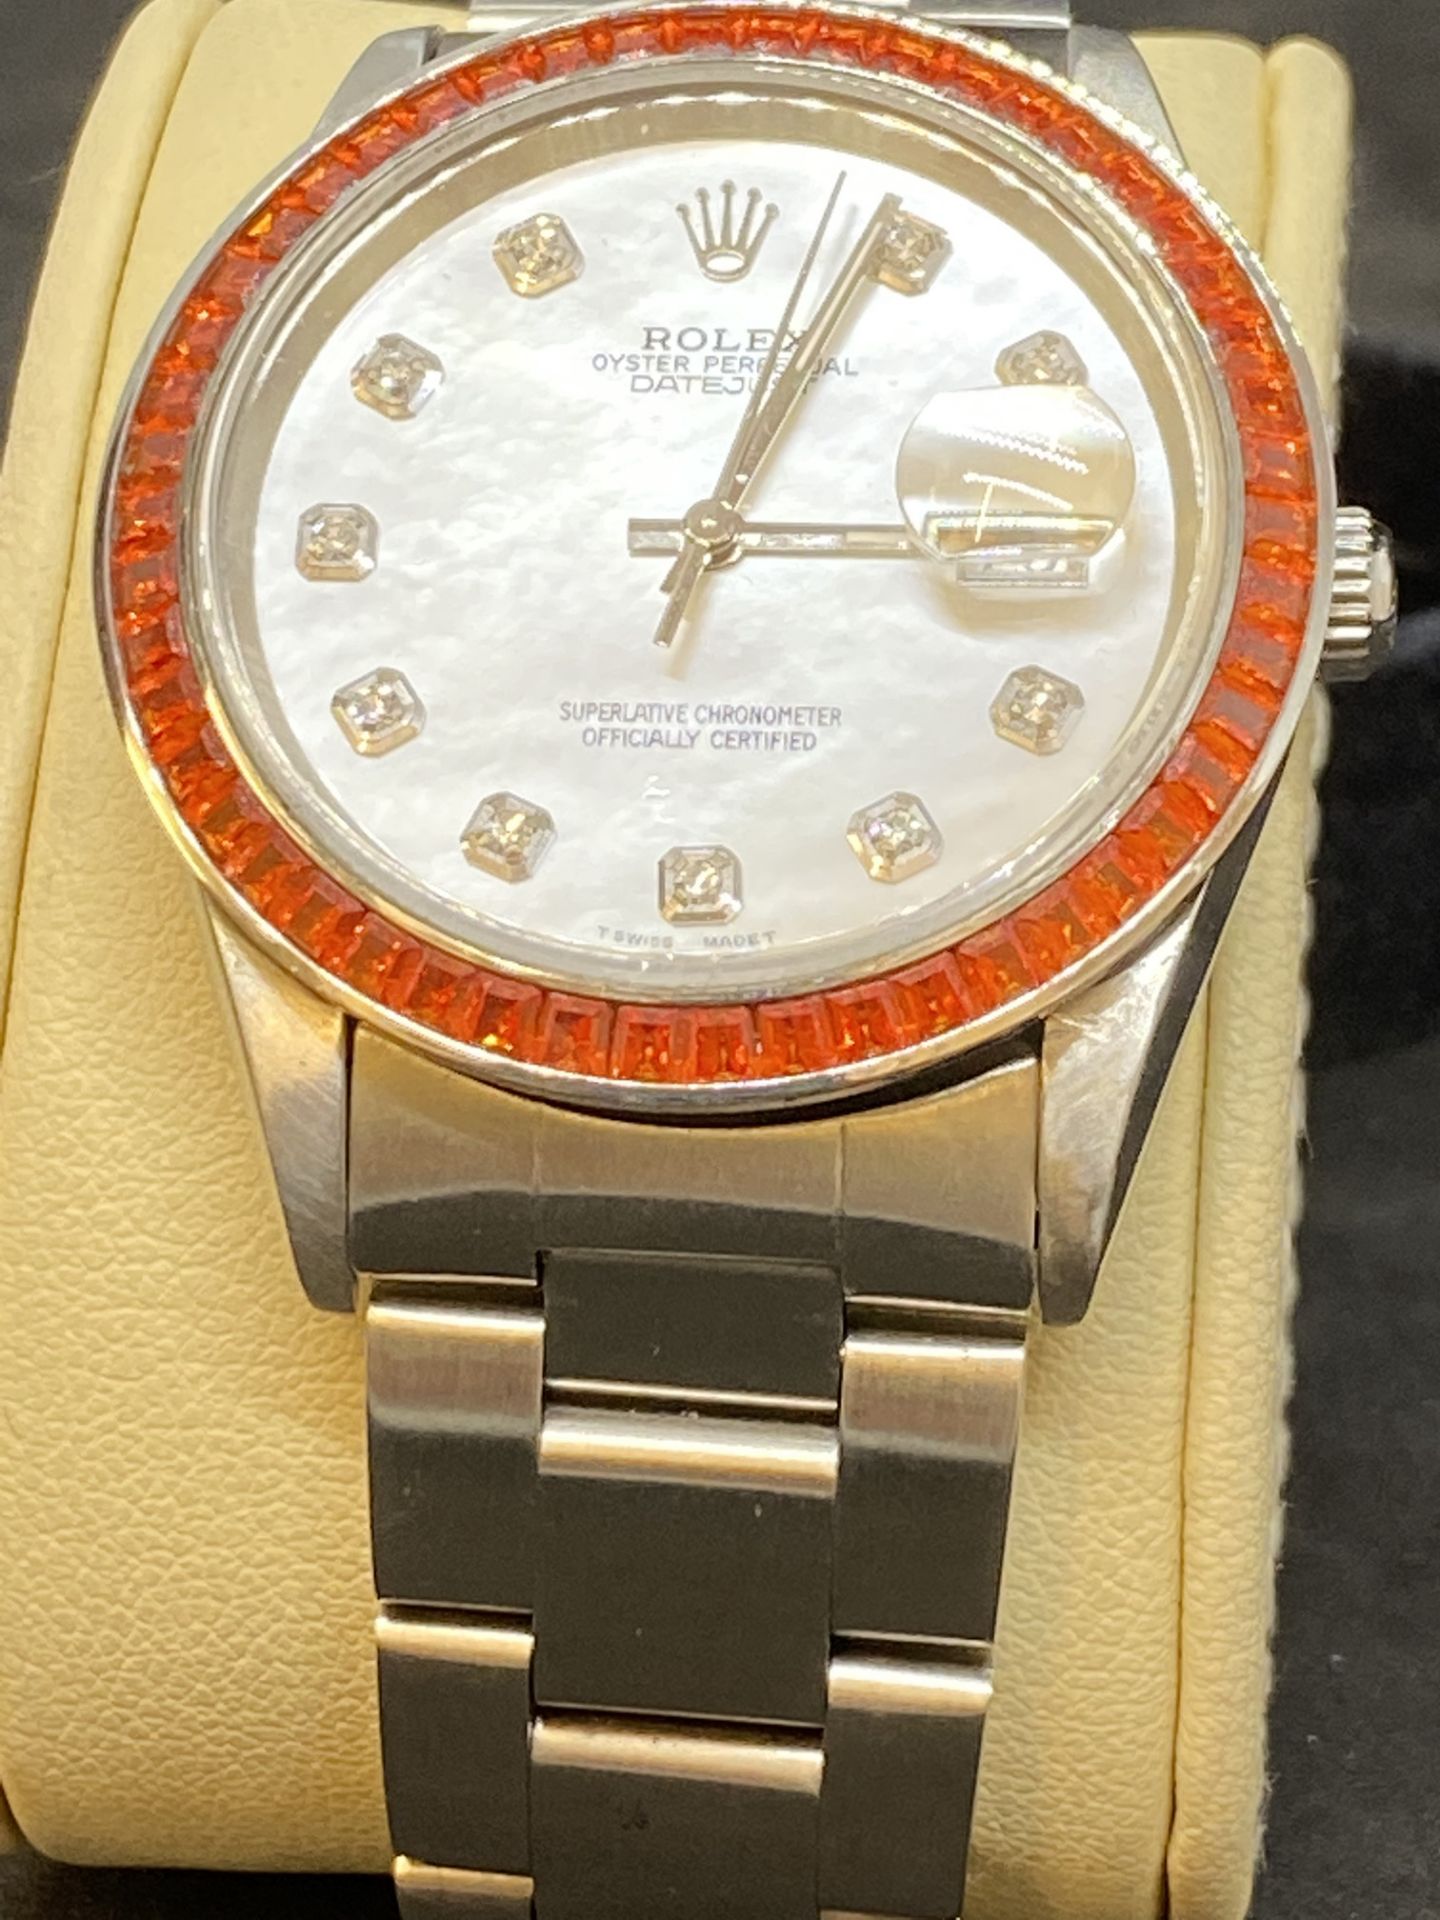 STAINLESS STEEL AUTOMATIC ROLEX WITH DIAMOND DOT DIAL & ORANGE BEZEL - Image 2 of 10